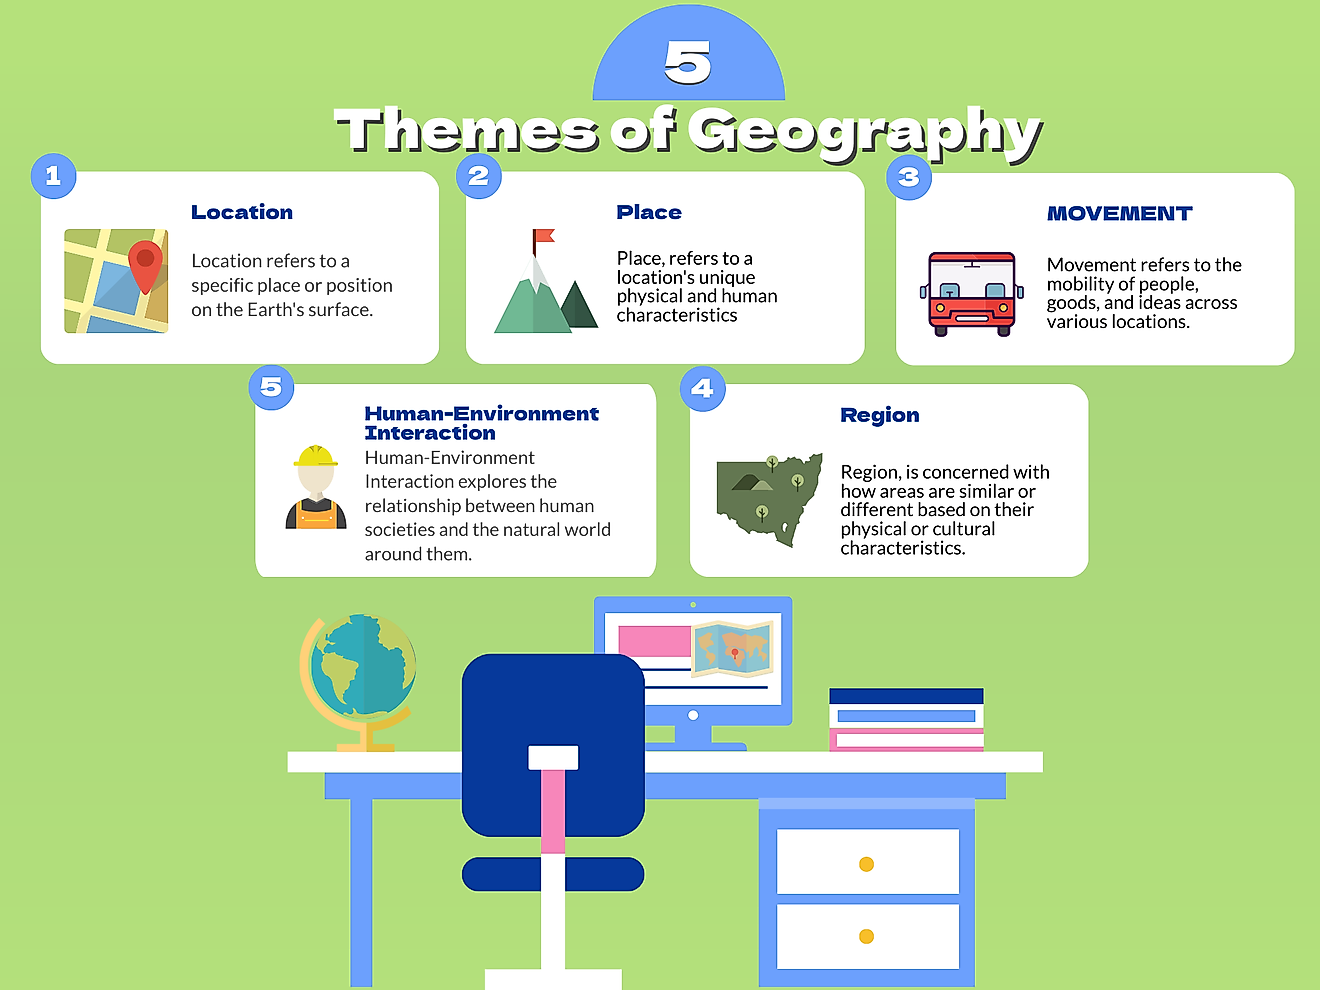 What are 3 examples of place in geography?